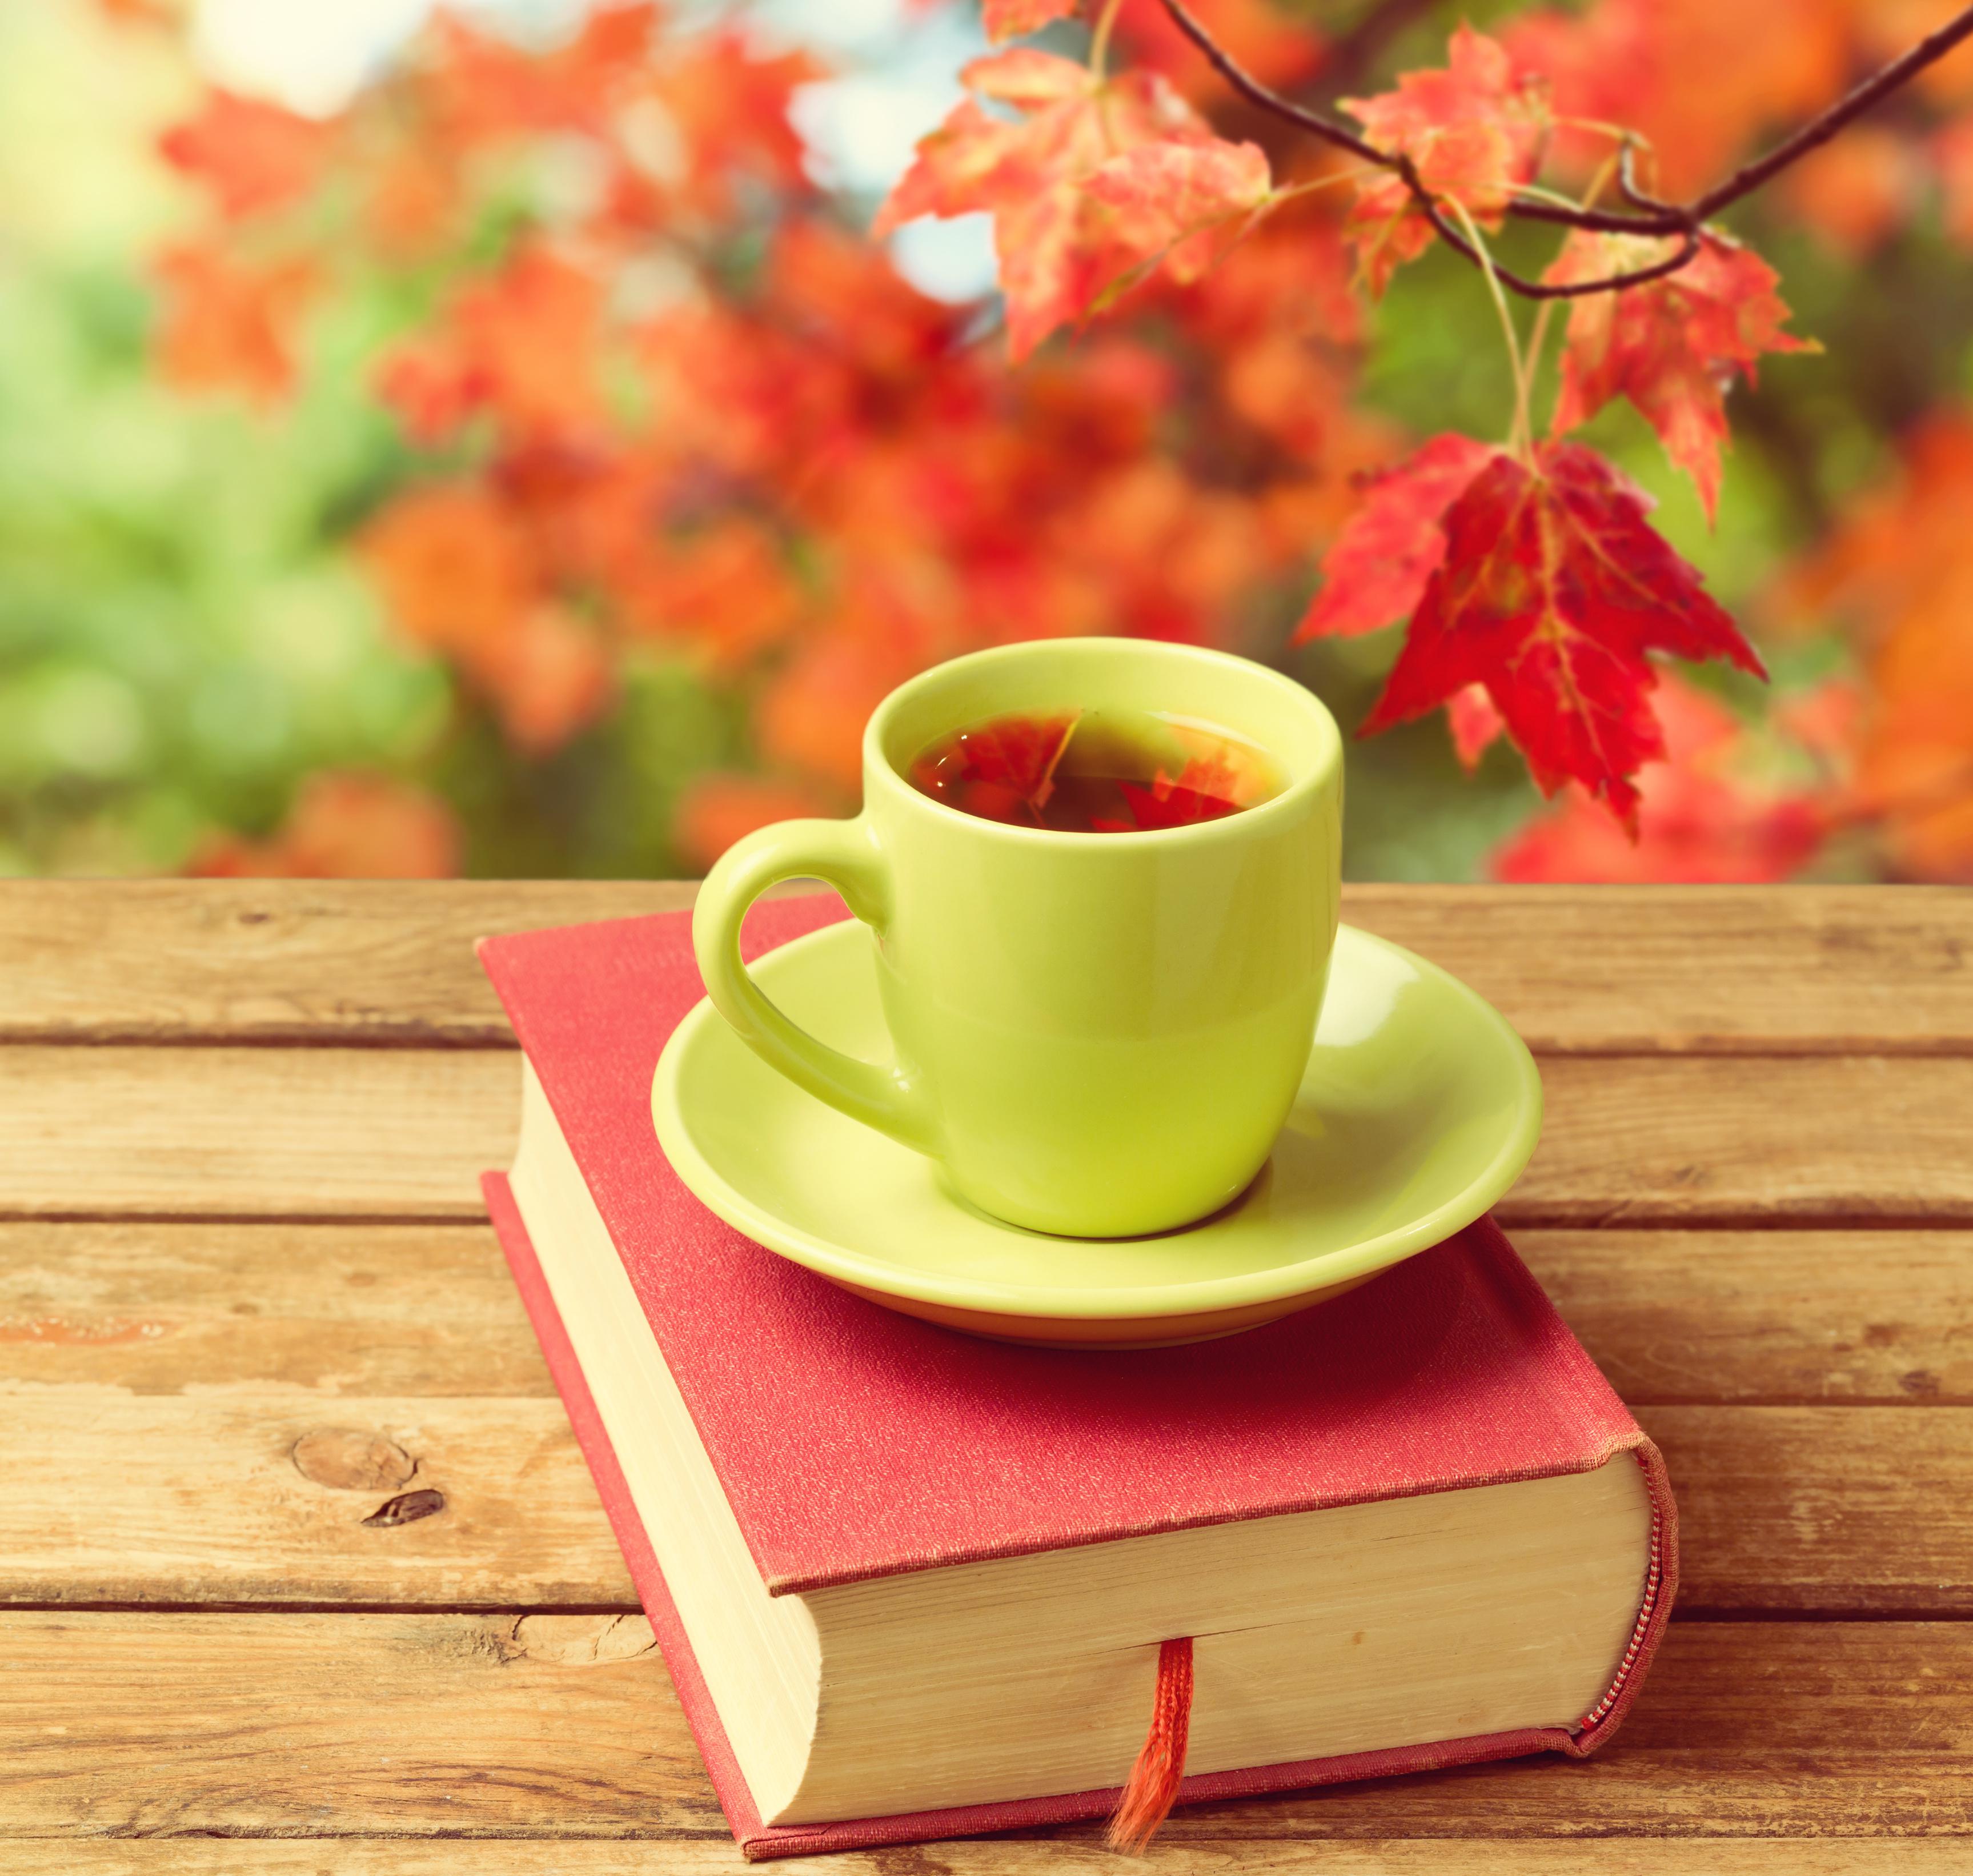 Autumn Coffee Books Wallpapers